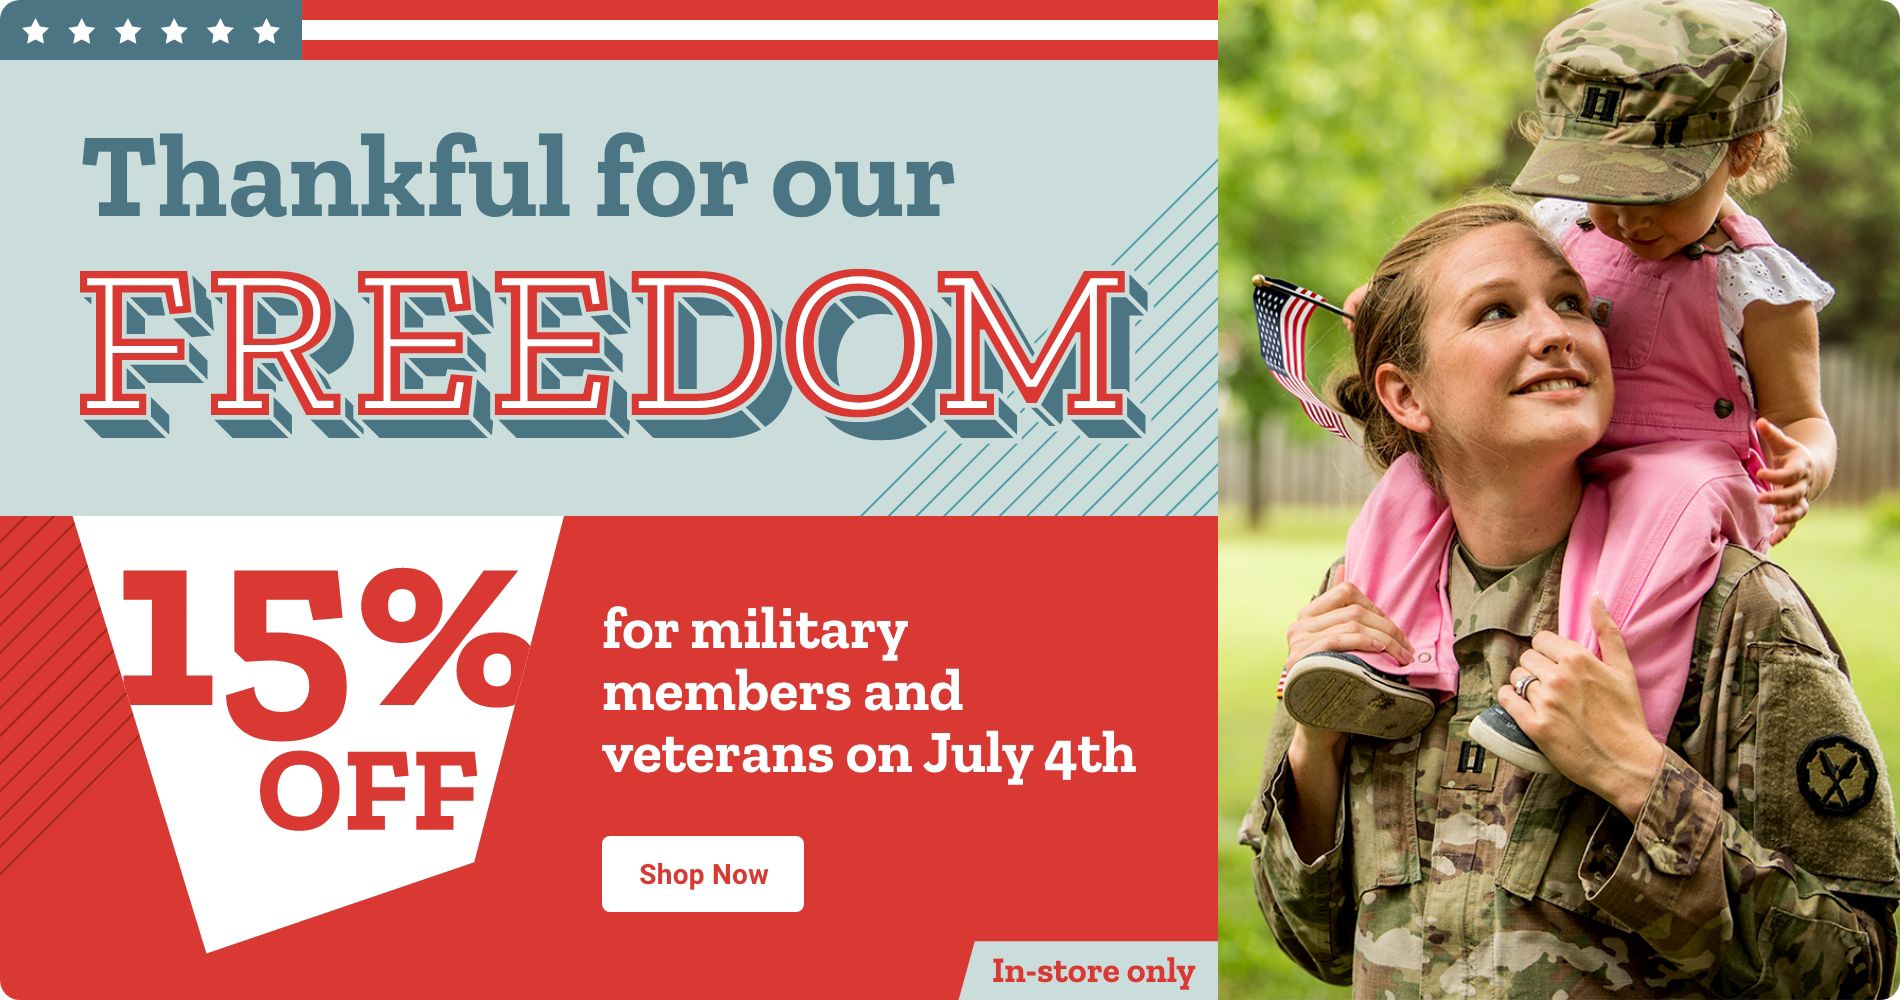 Thankful for our freedom. 15% off for military members and veterans on July 4th. Shop Now.